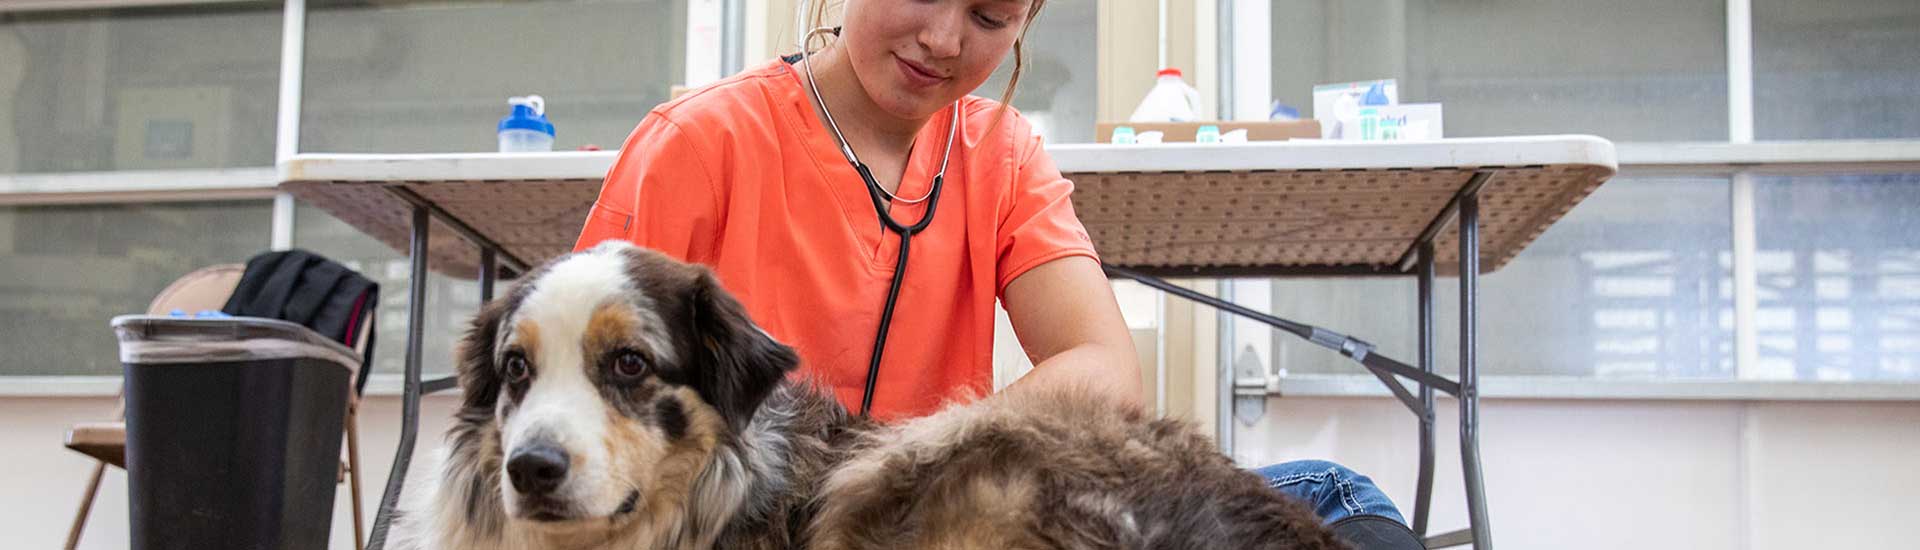 Pre-vet student with dog